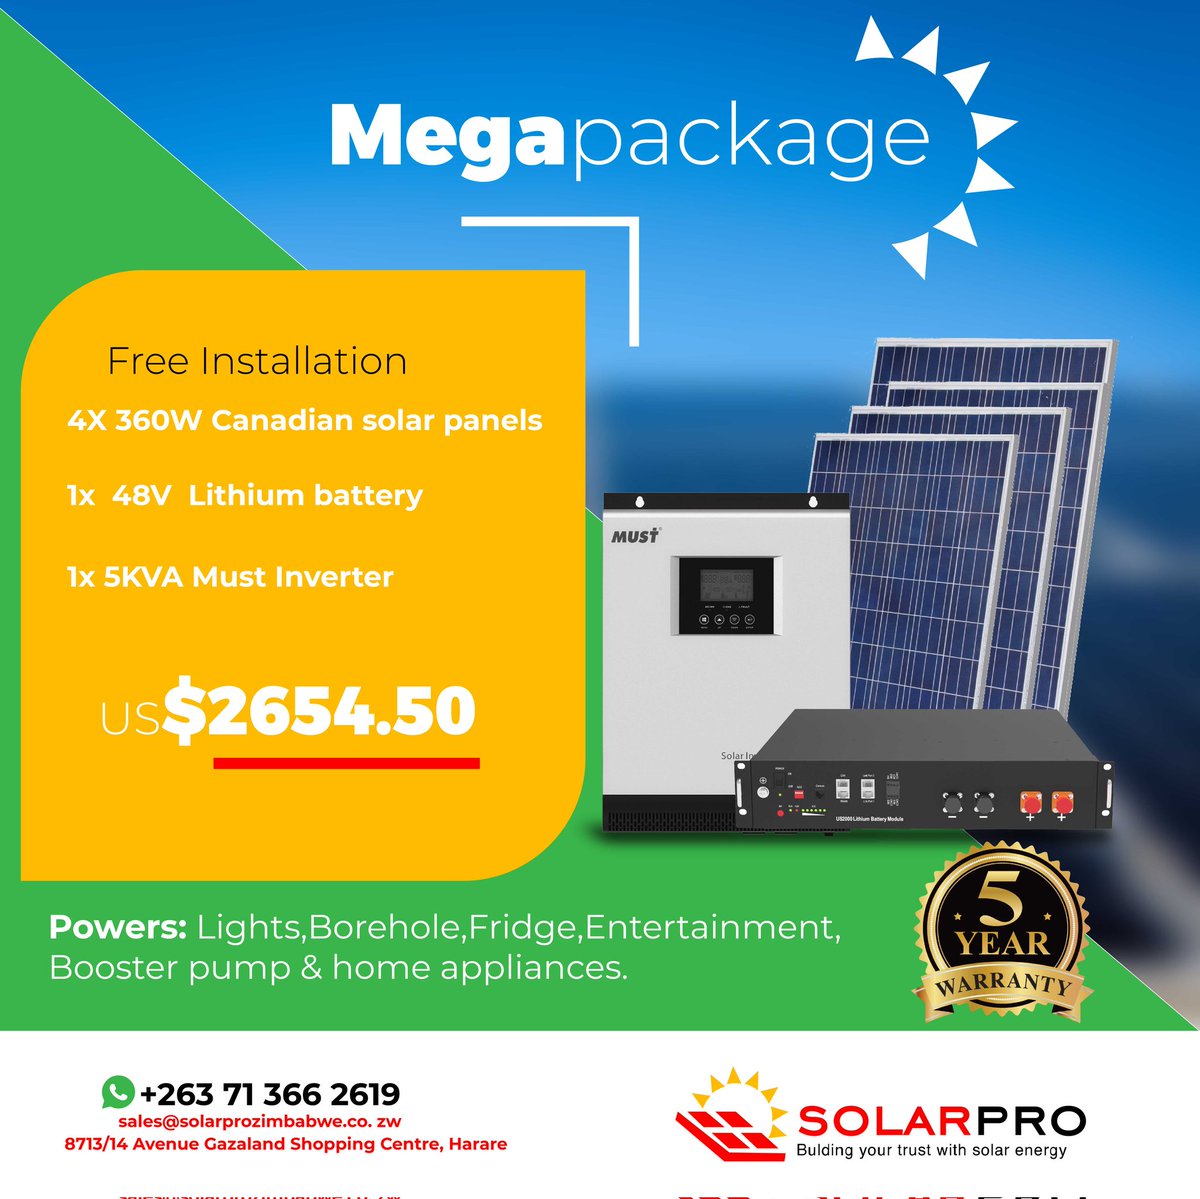 Our solutions are driven by creativity and innovation. No project is too small or too large for Solar Pro Zimbabwe ! Call us at 0713662619 and we can help you solve your solar problems! 

#SolarProZimbabwe #SolarPower #RenewableEnergy #Zimbabwe #Harare #Localbusiness #Solar